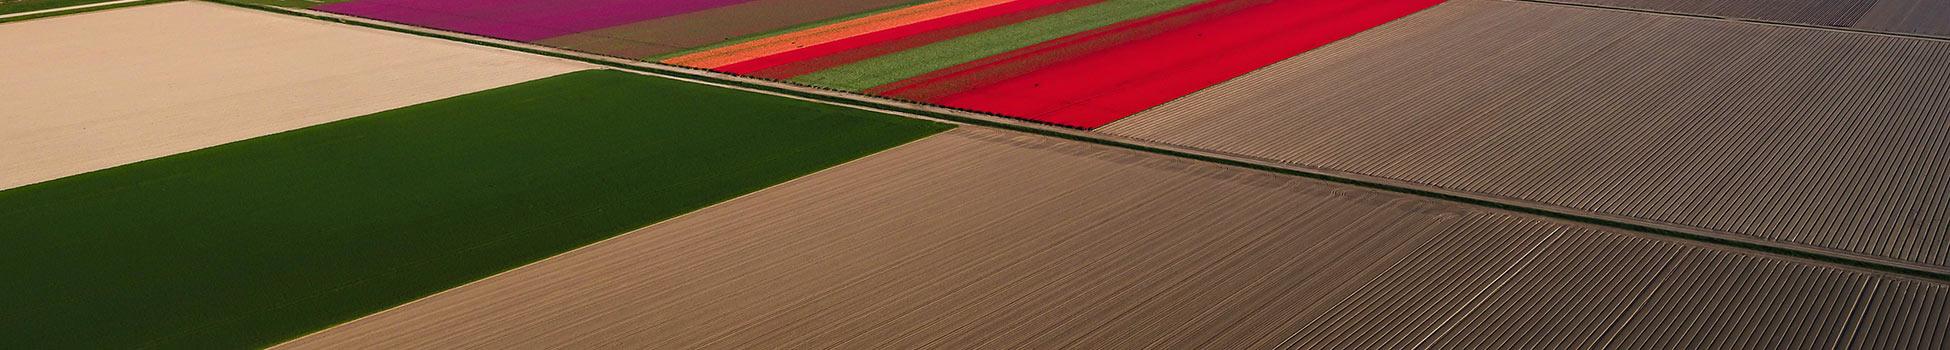 colorful fields